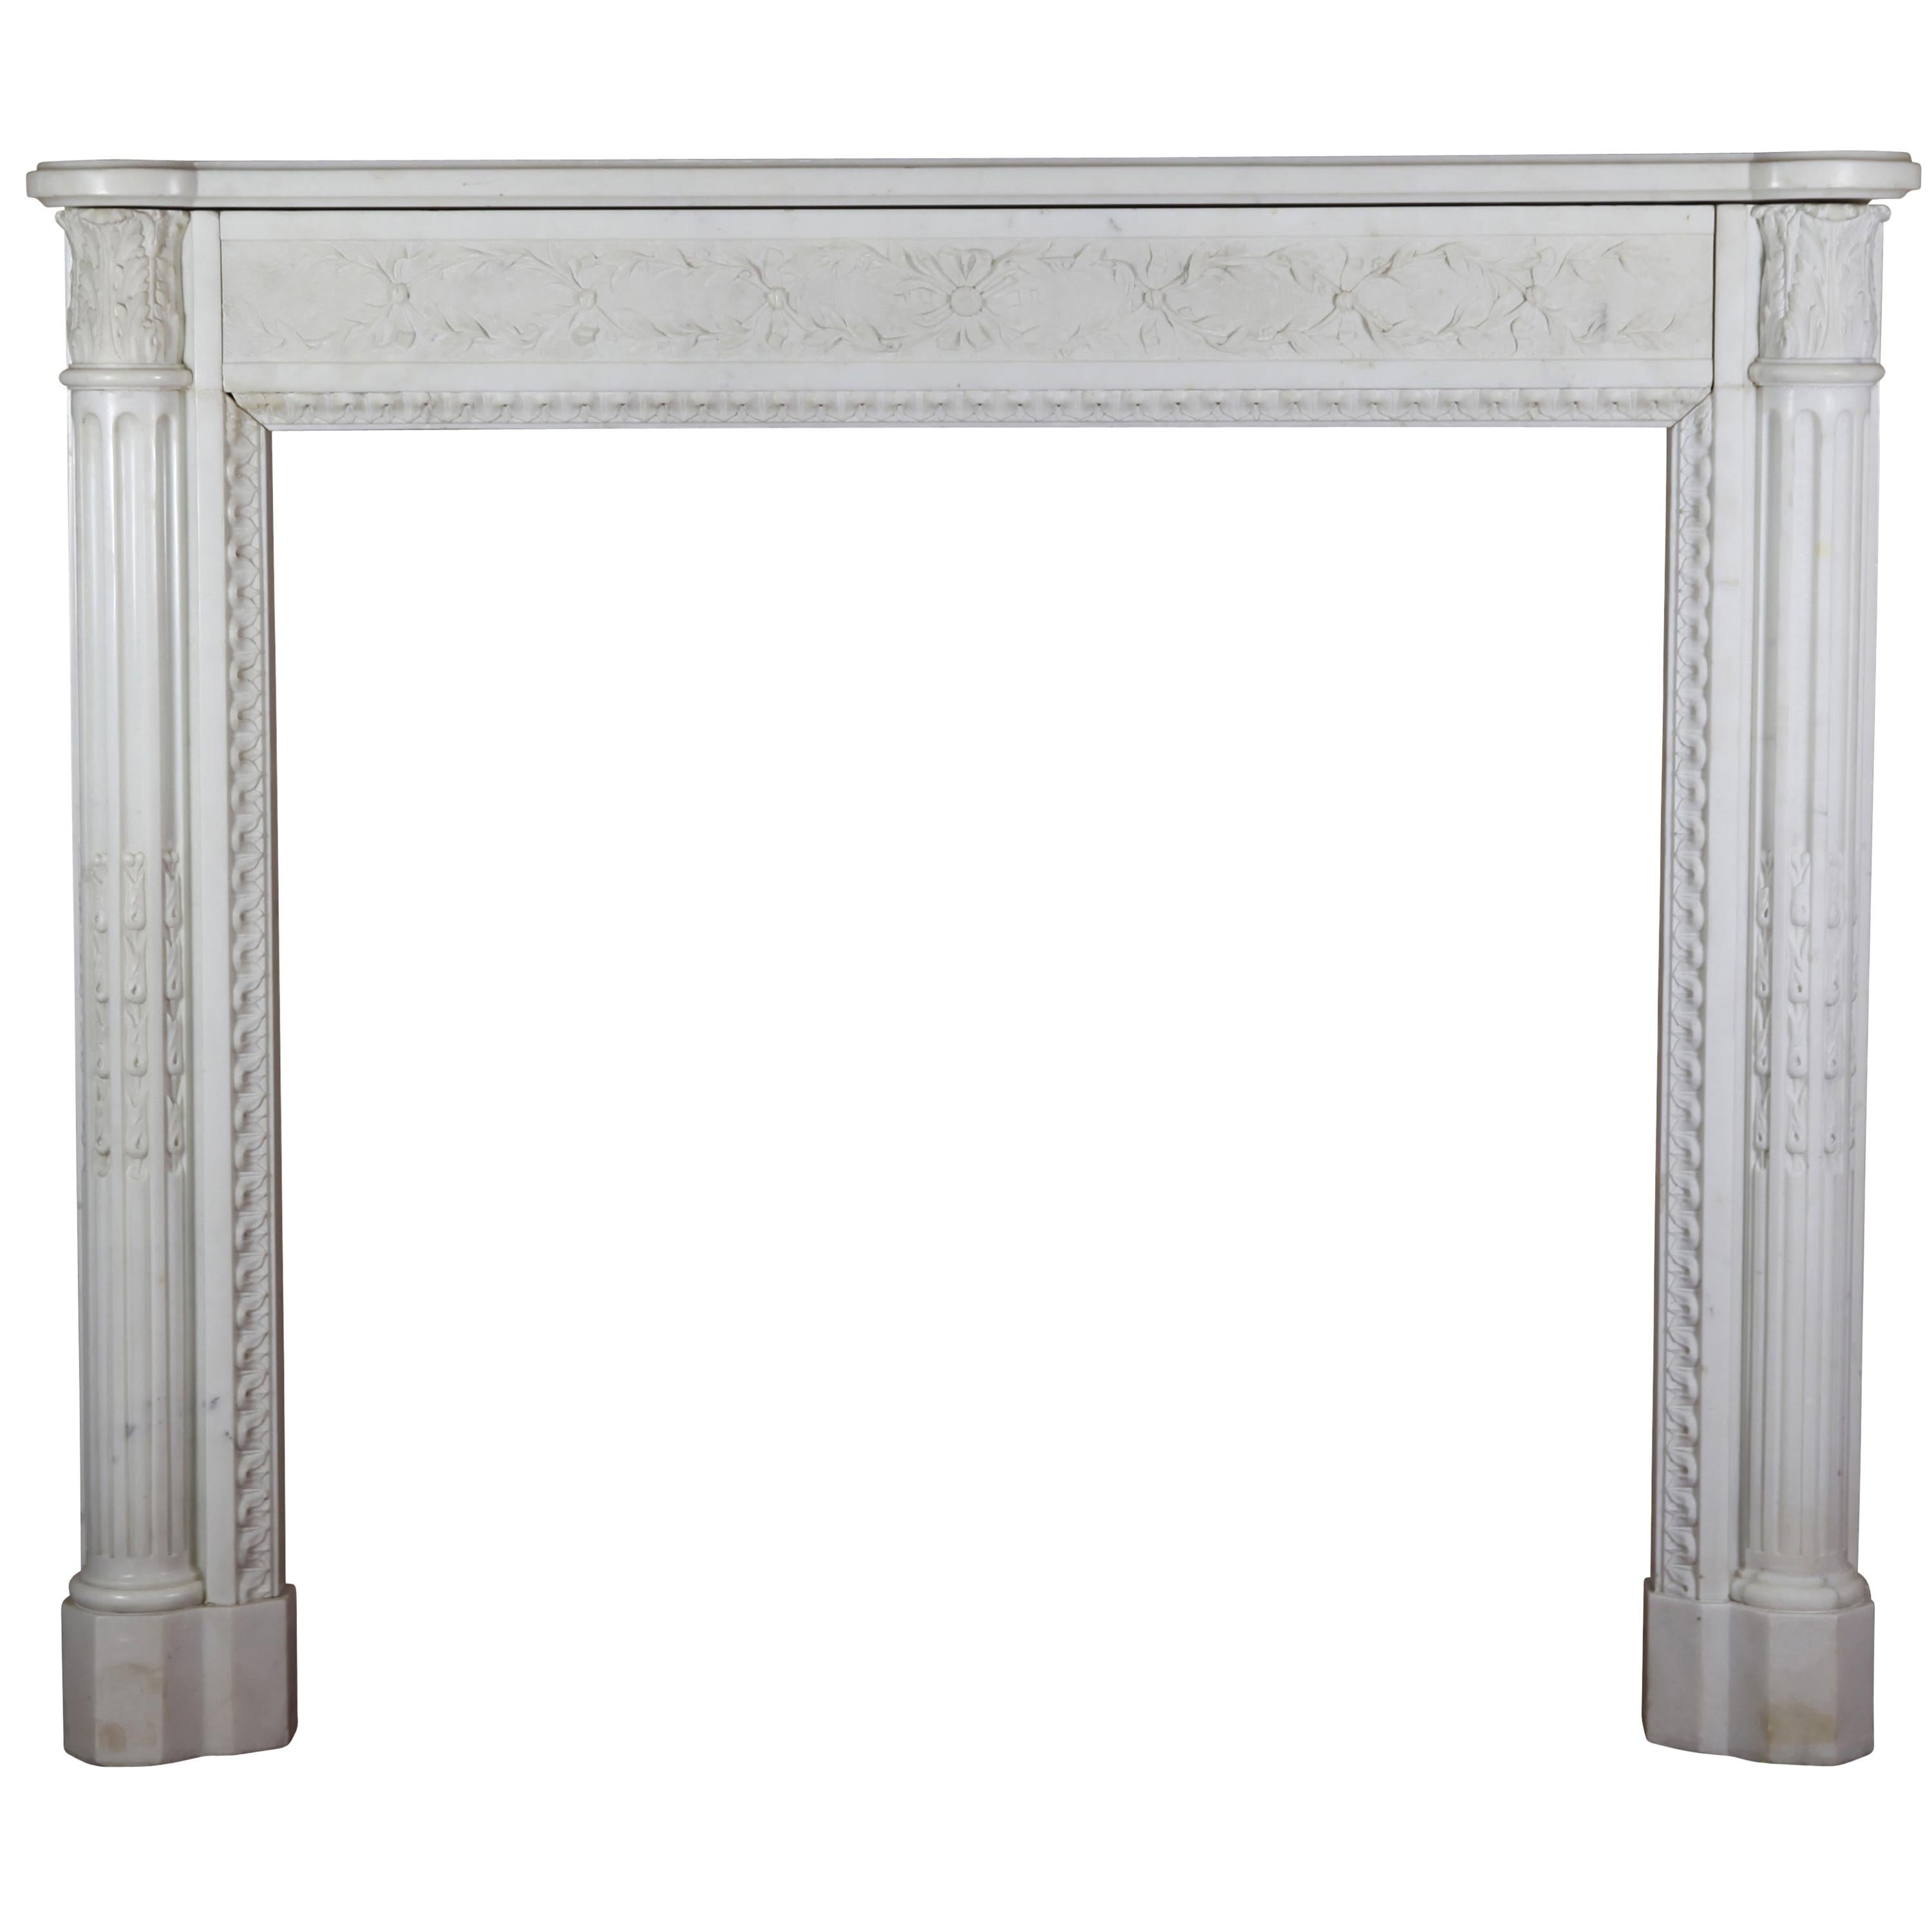 Fine Antique French Louis XVI Period White Statuary Marble Fireplace Surround